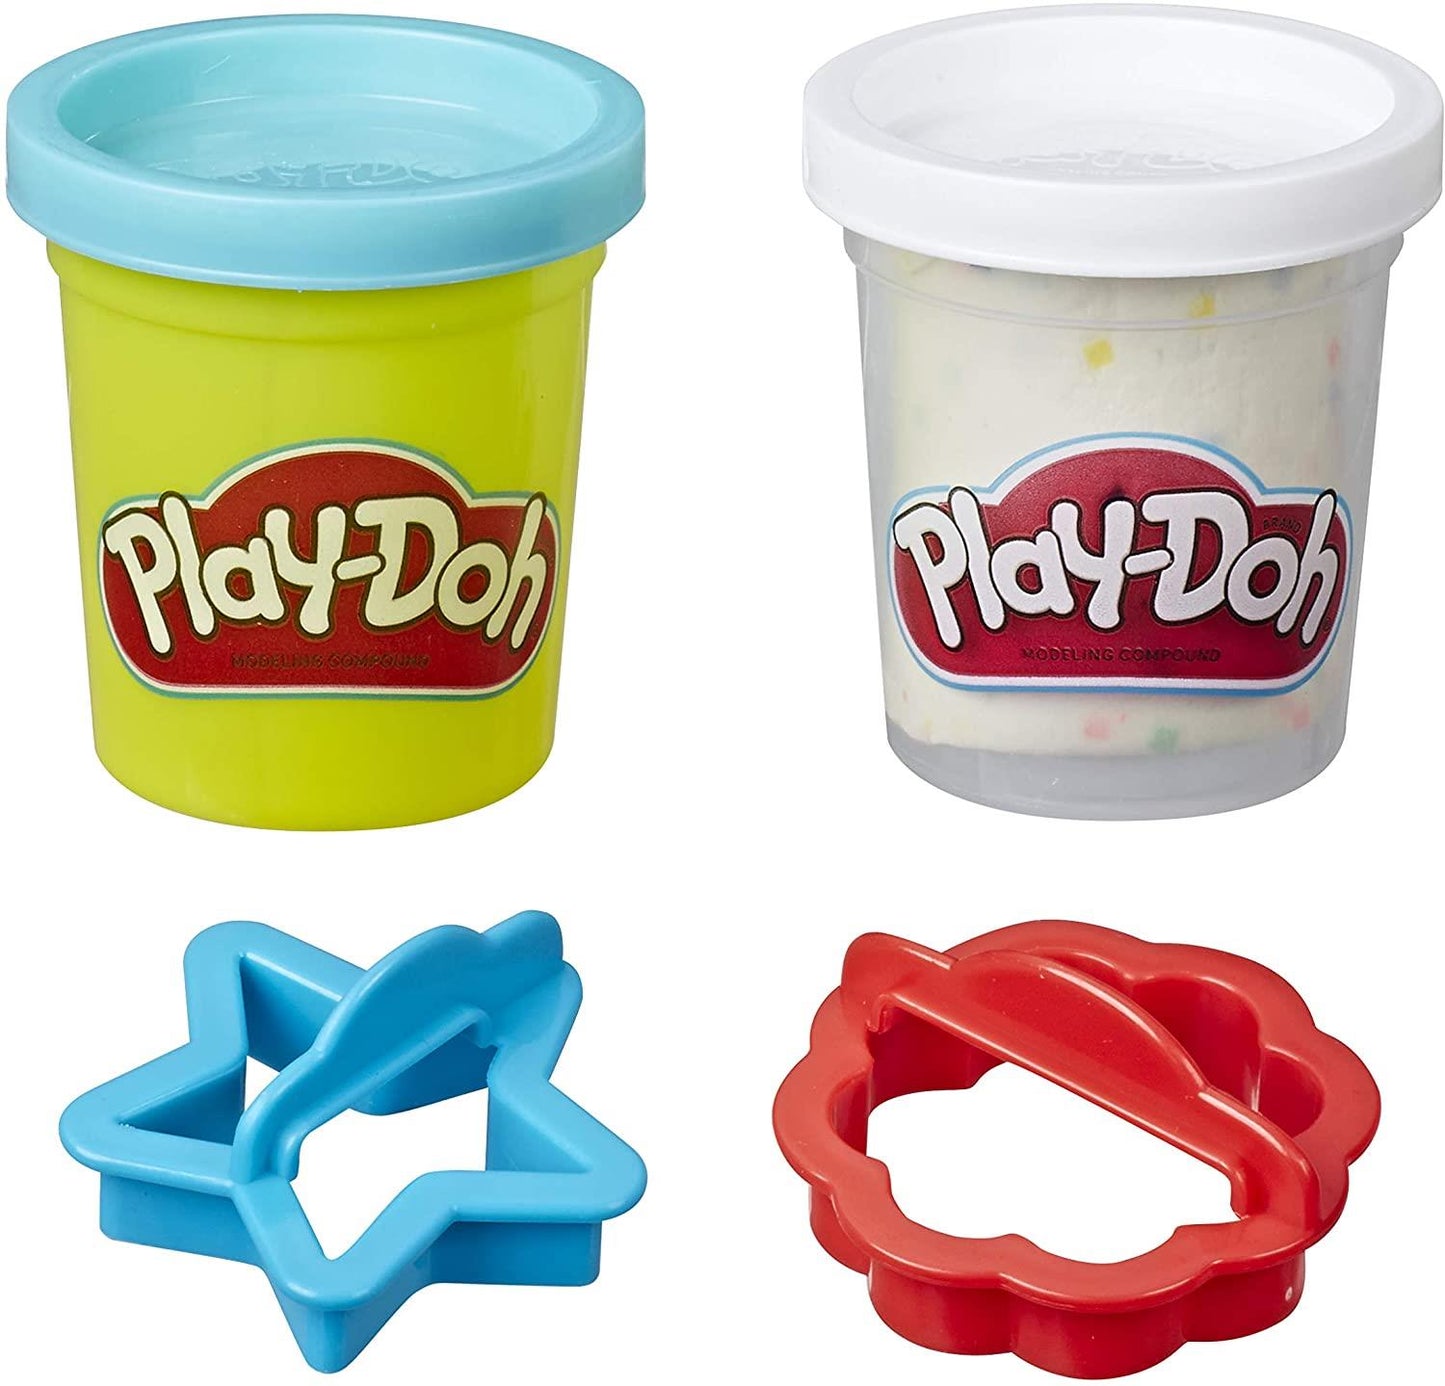 PLAY-DOH BLUE Sugar Cookie Canister Play Food Set with 2 Non-Toxic Colors